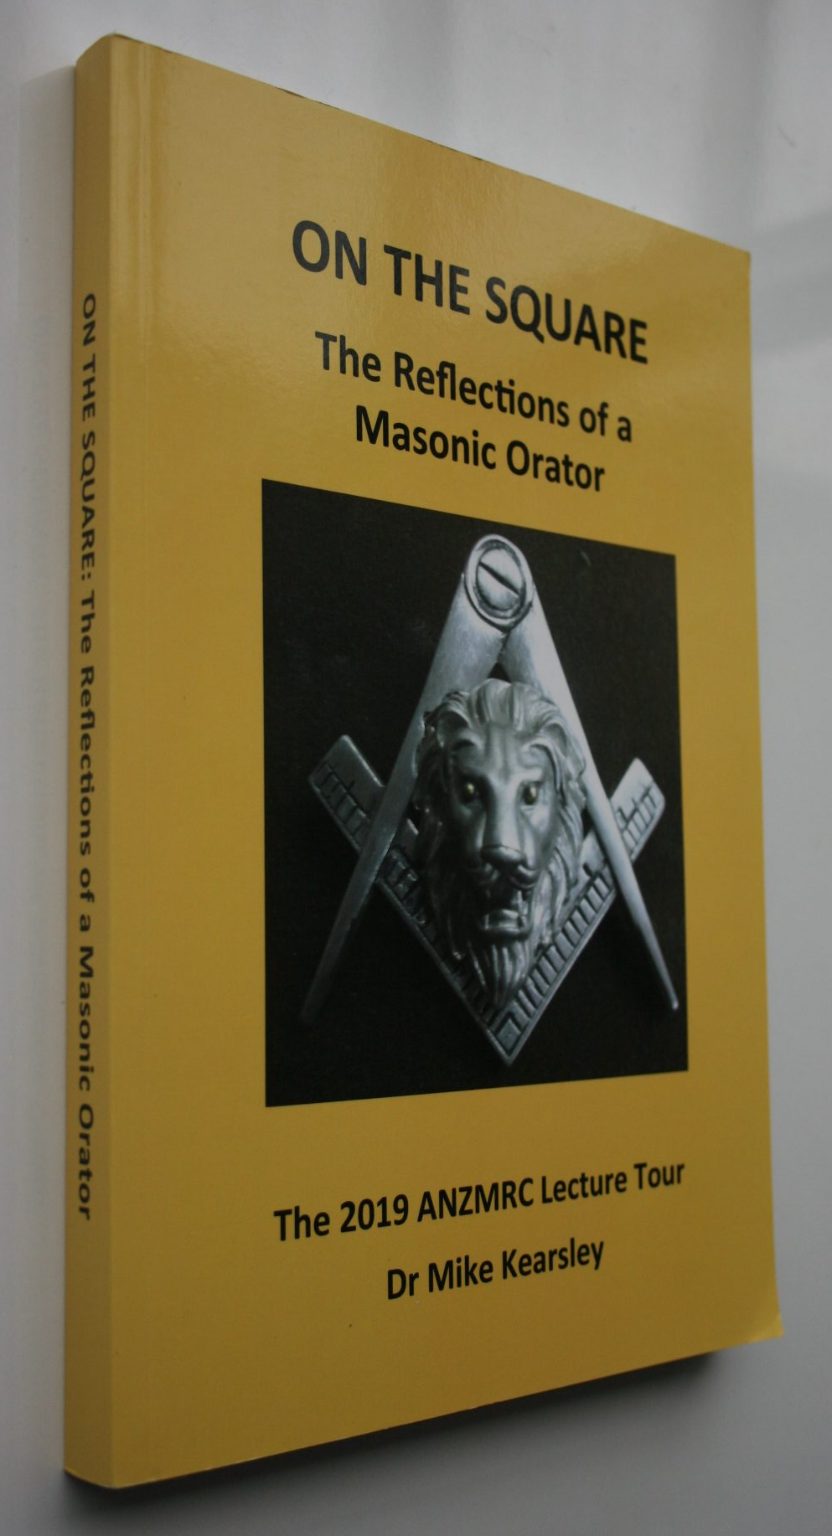 On The Square: The Reflections of a Masonic Orator. 2019 ANZMRC Lecture Tour. by Mike Kearsley. VERY SCARCE. SIGNED BY AUTHOR.